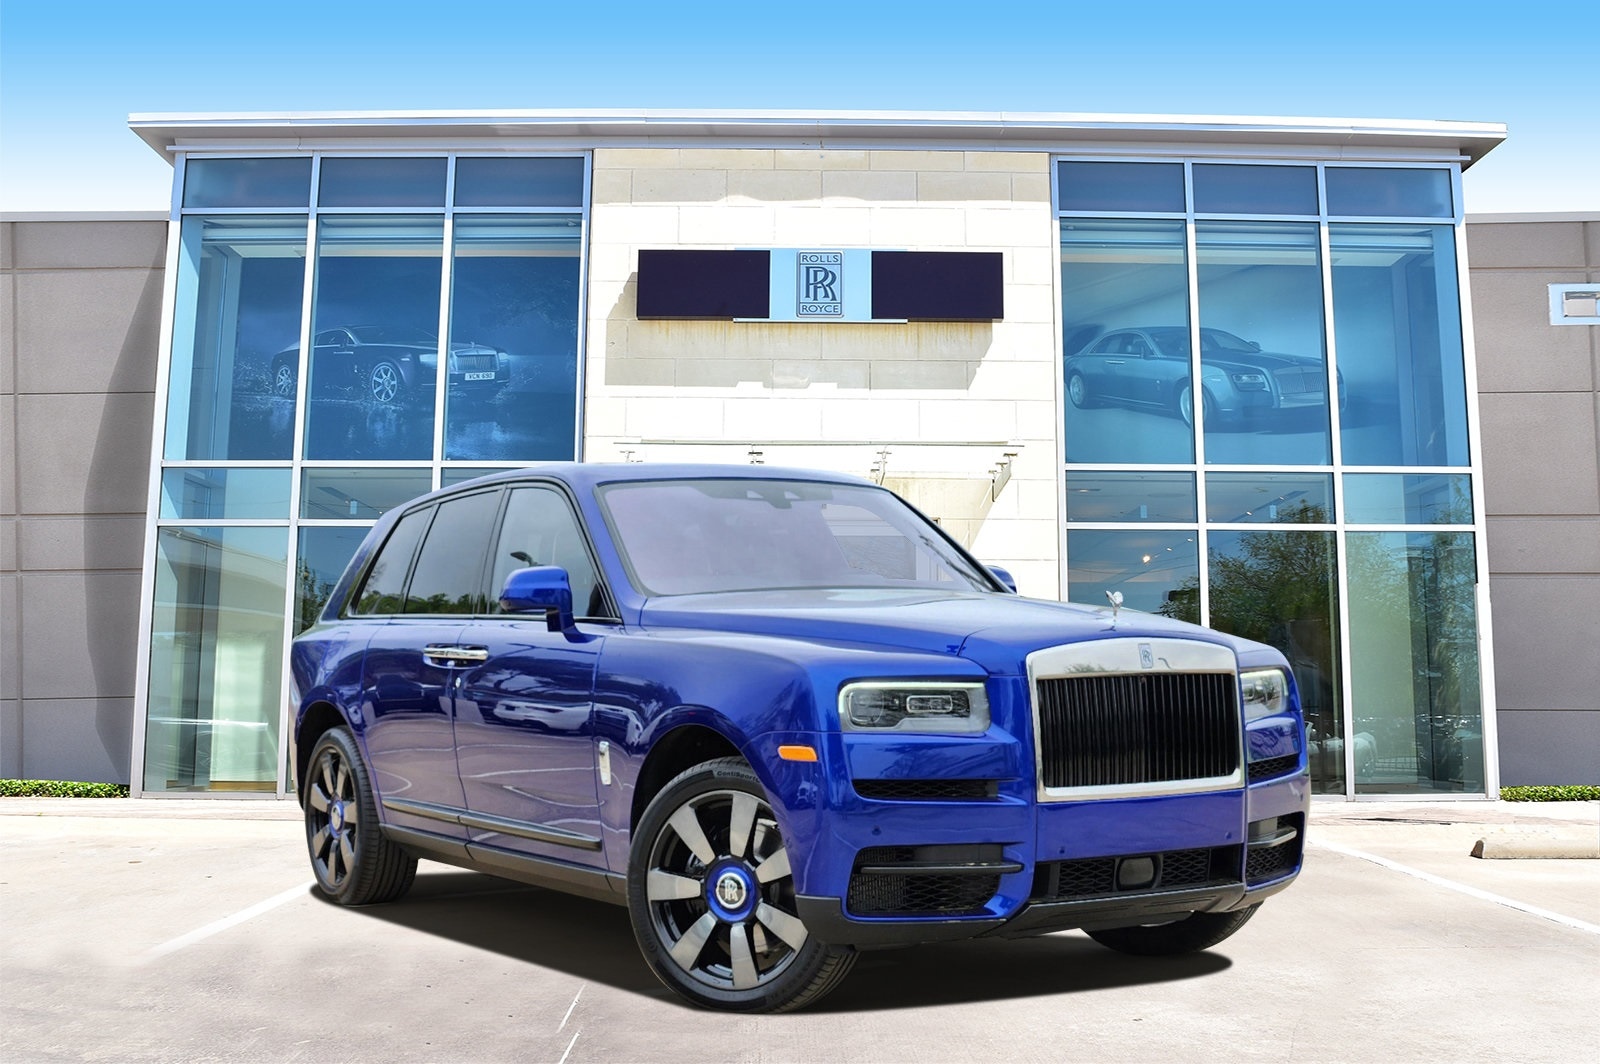 Why You Need The Rolls-Royce Cullinan SUV